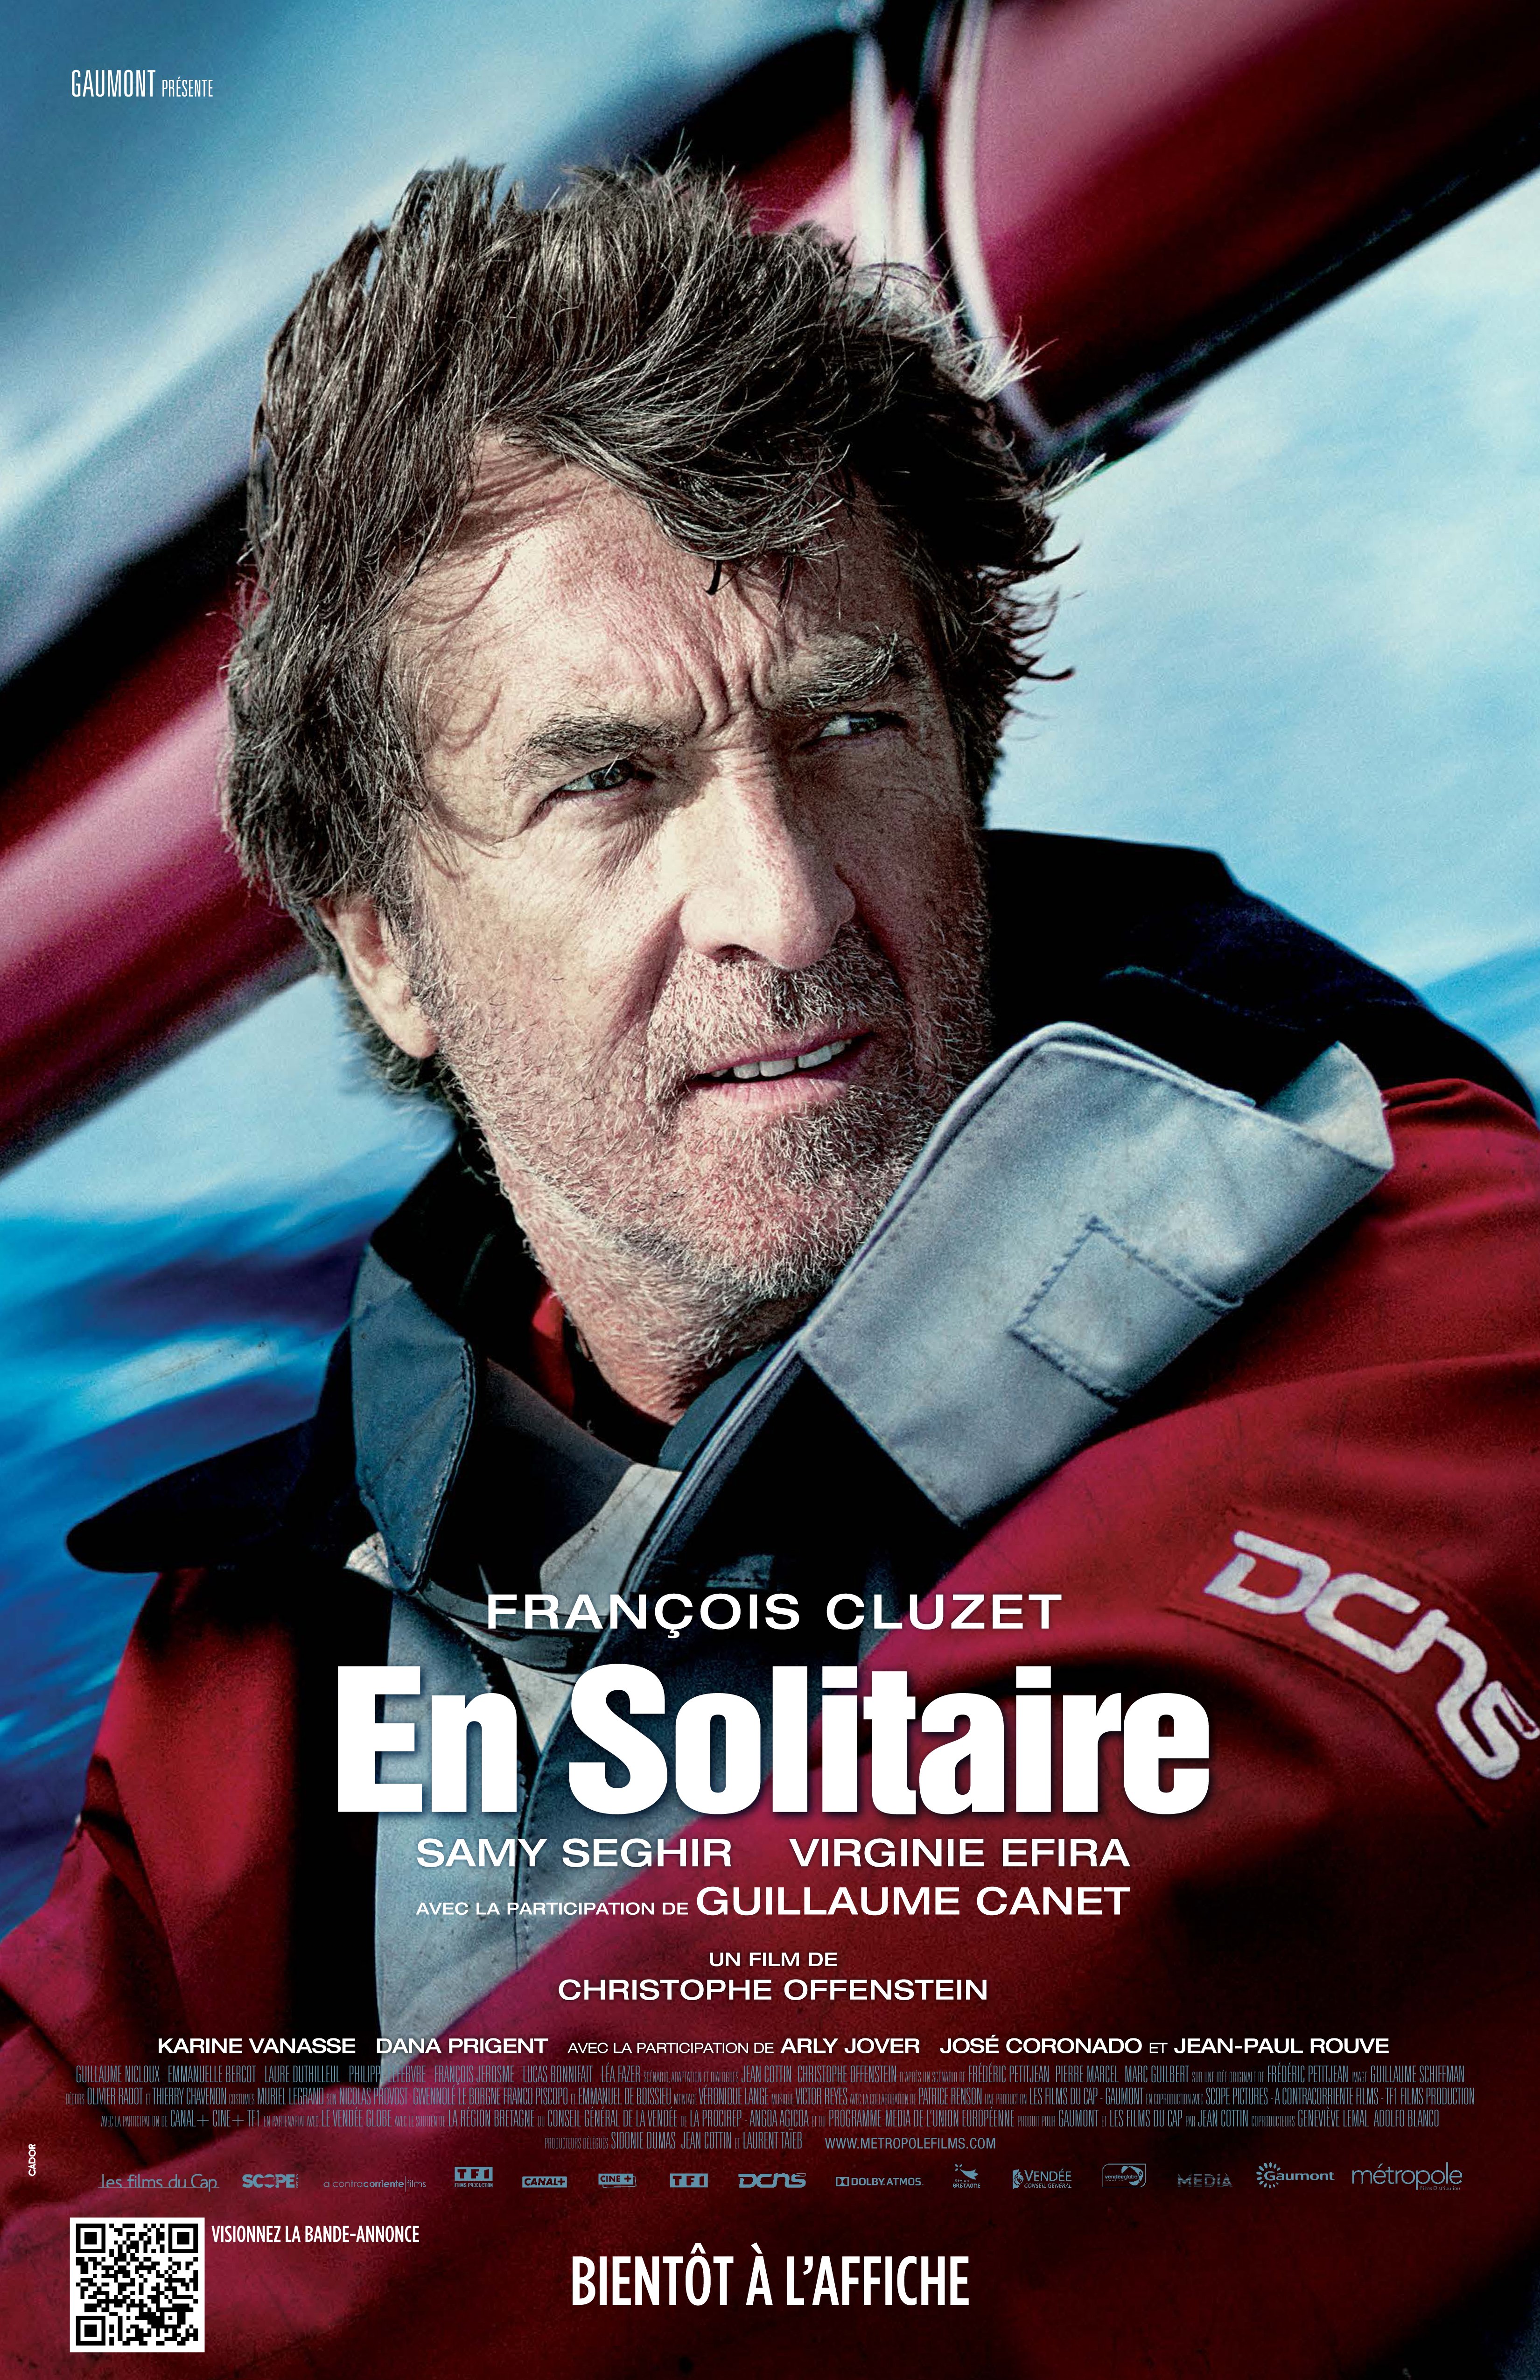 Poster of the movie En solitaire